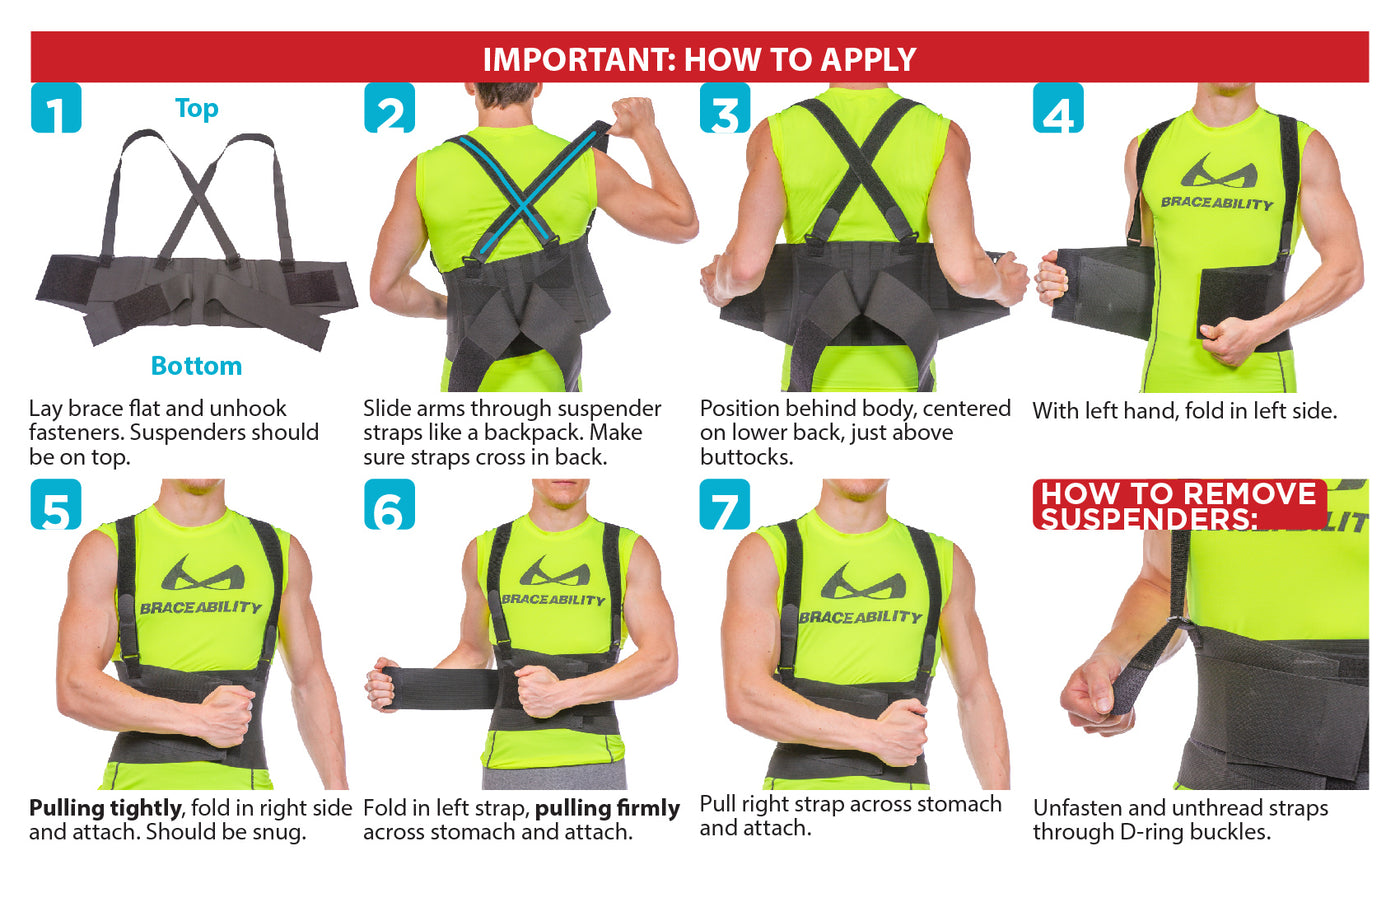 How to put on the back support for work instruction sheet. Start by putting on suspenders like a backpack, adjust waist band, then cinch tension straps